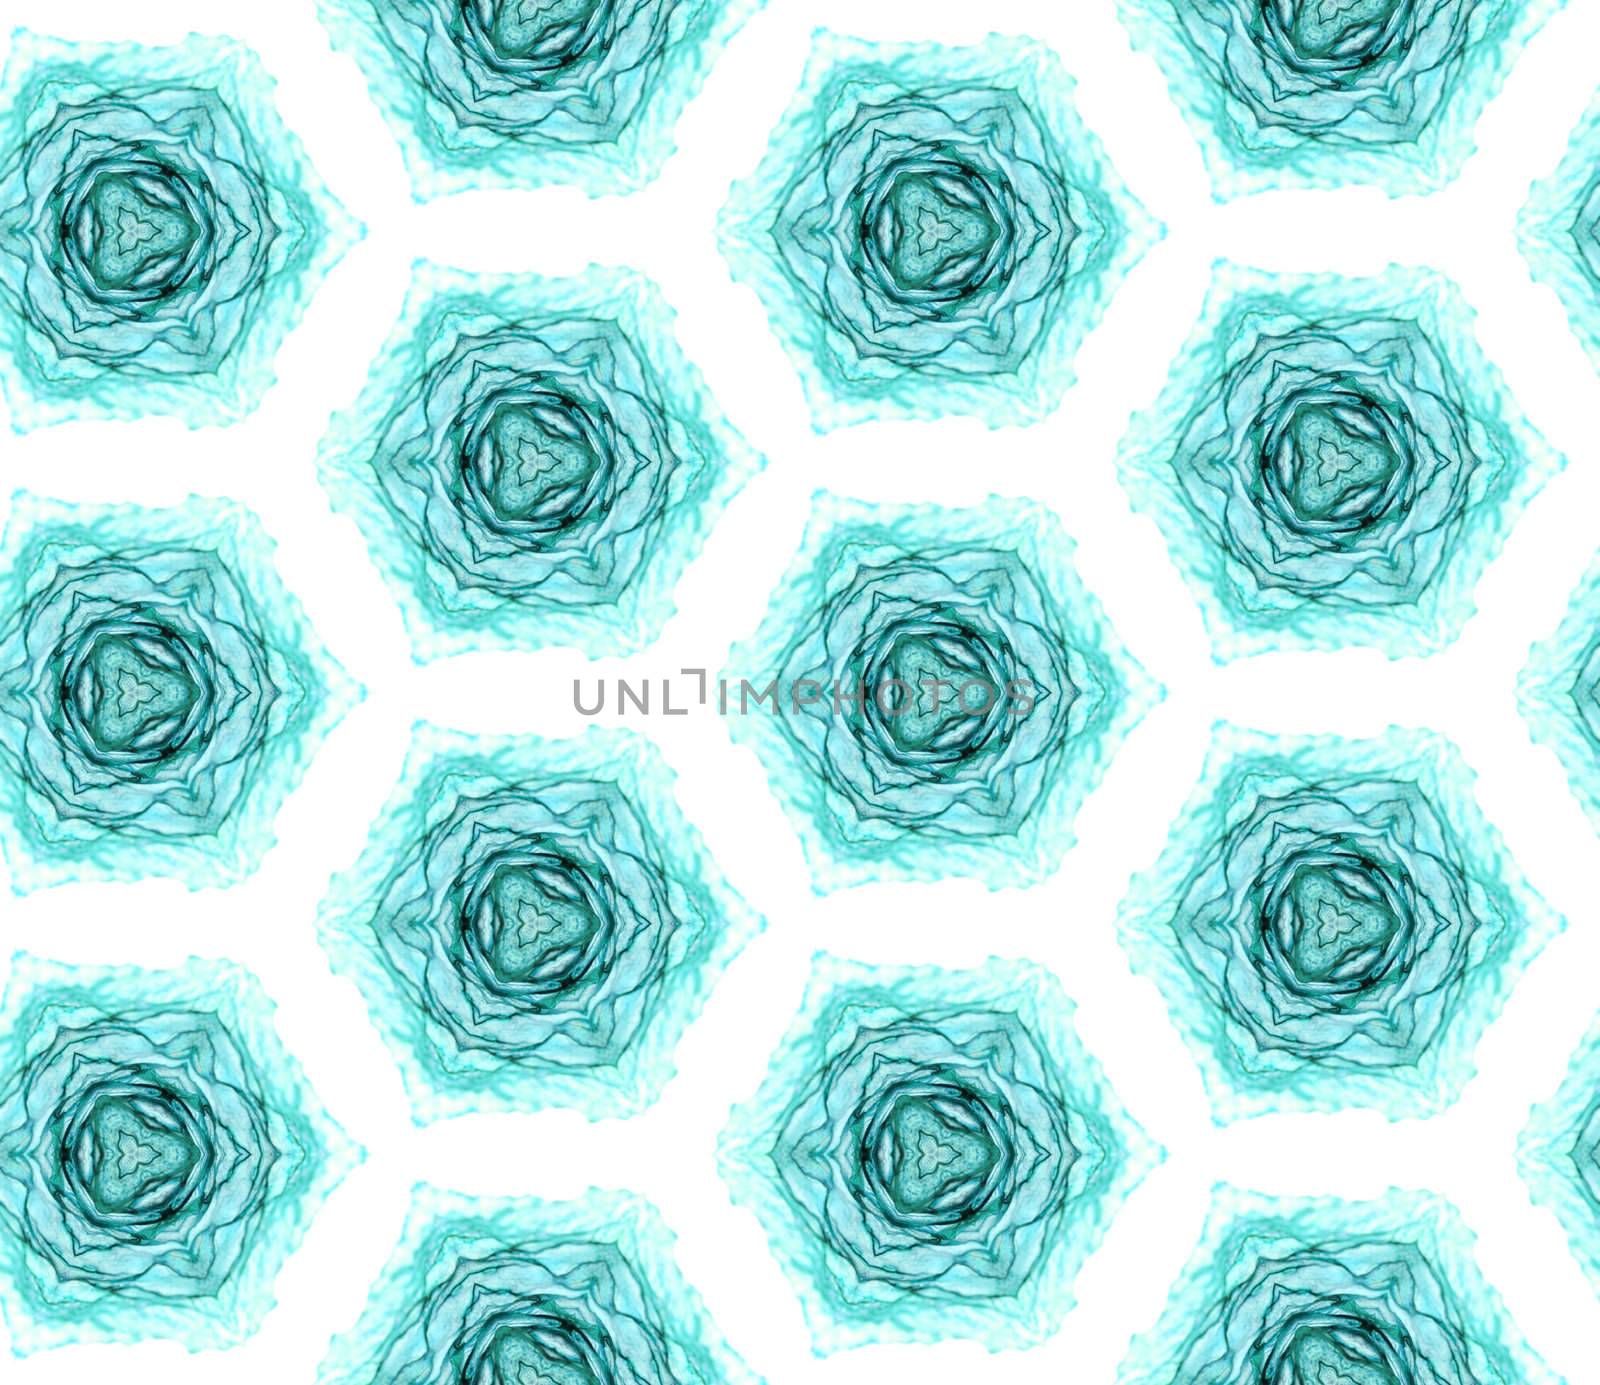 Seamless abstract pattern in light blue and white